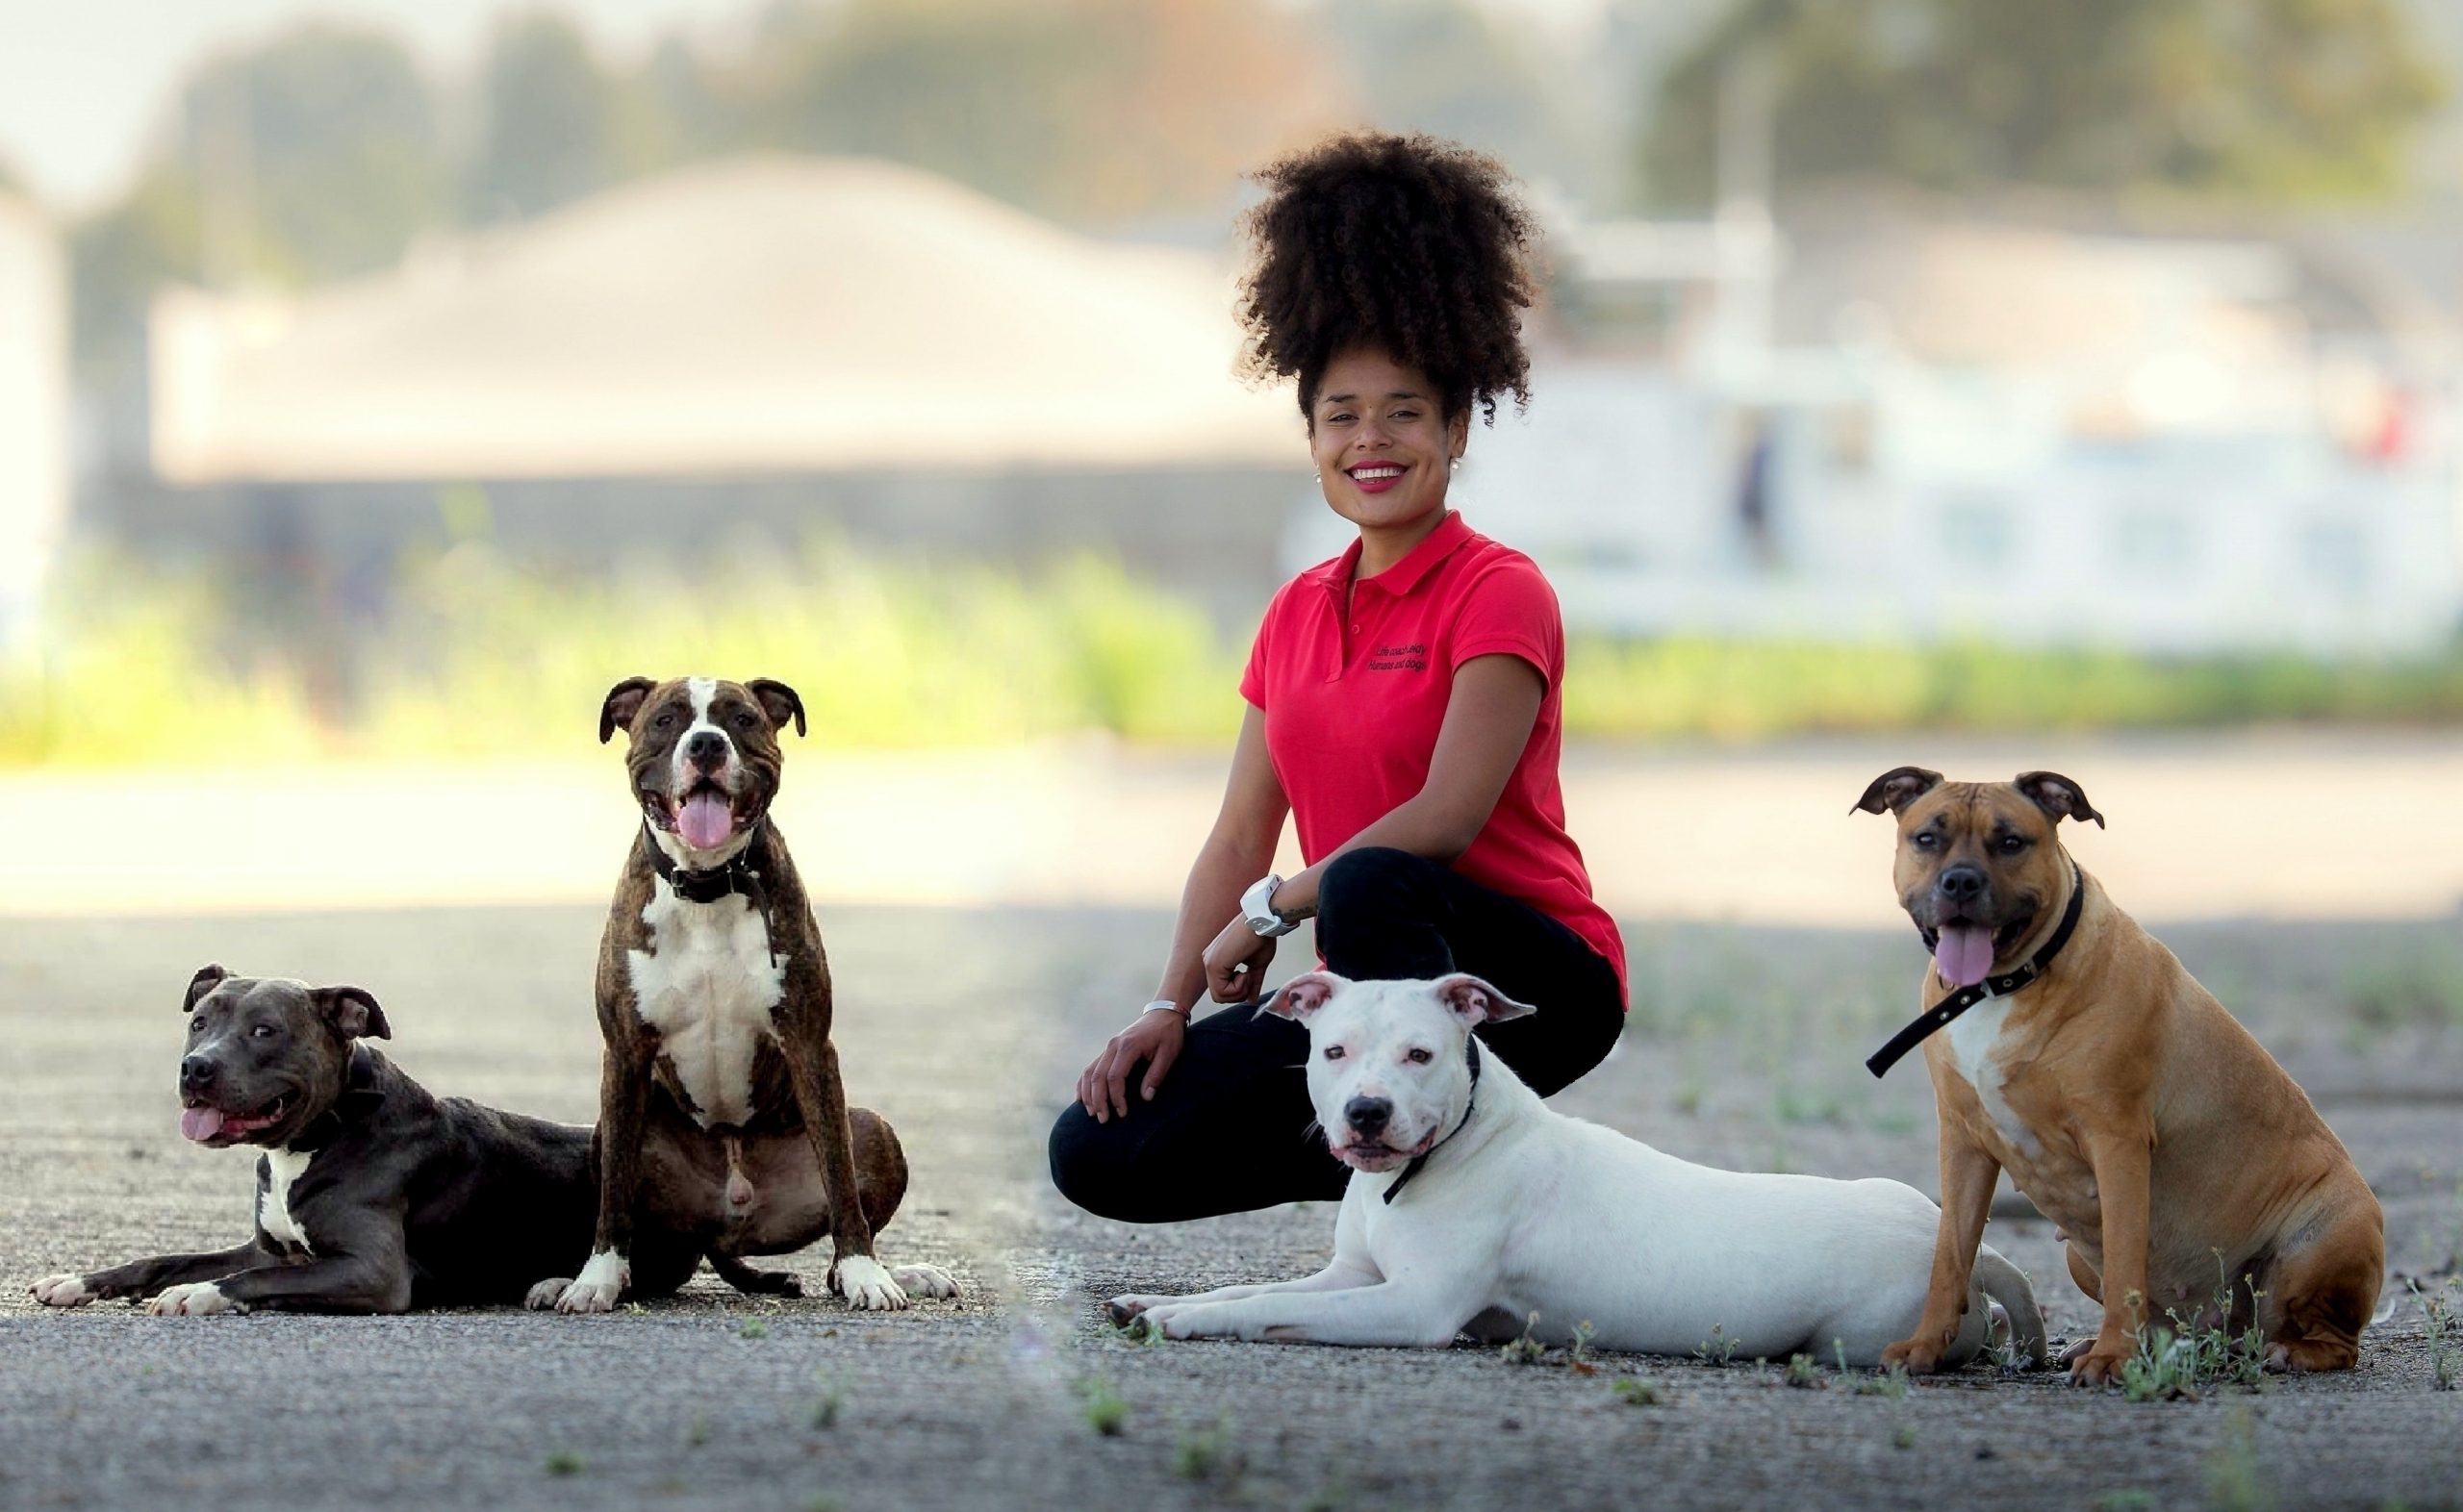 Life coach Leidy - Humans and dogs